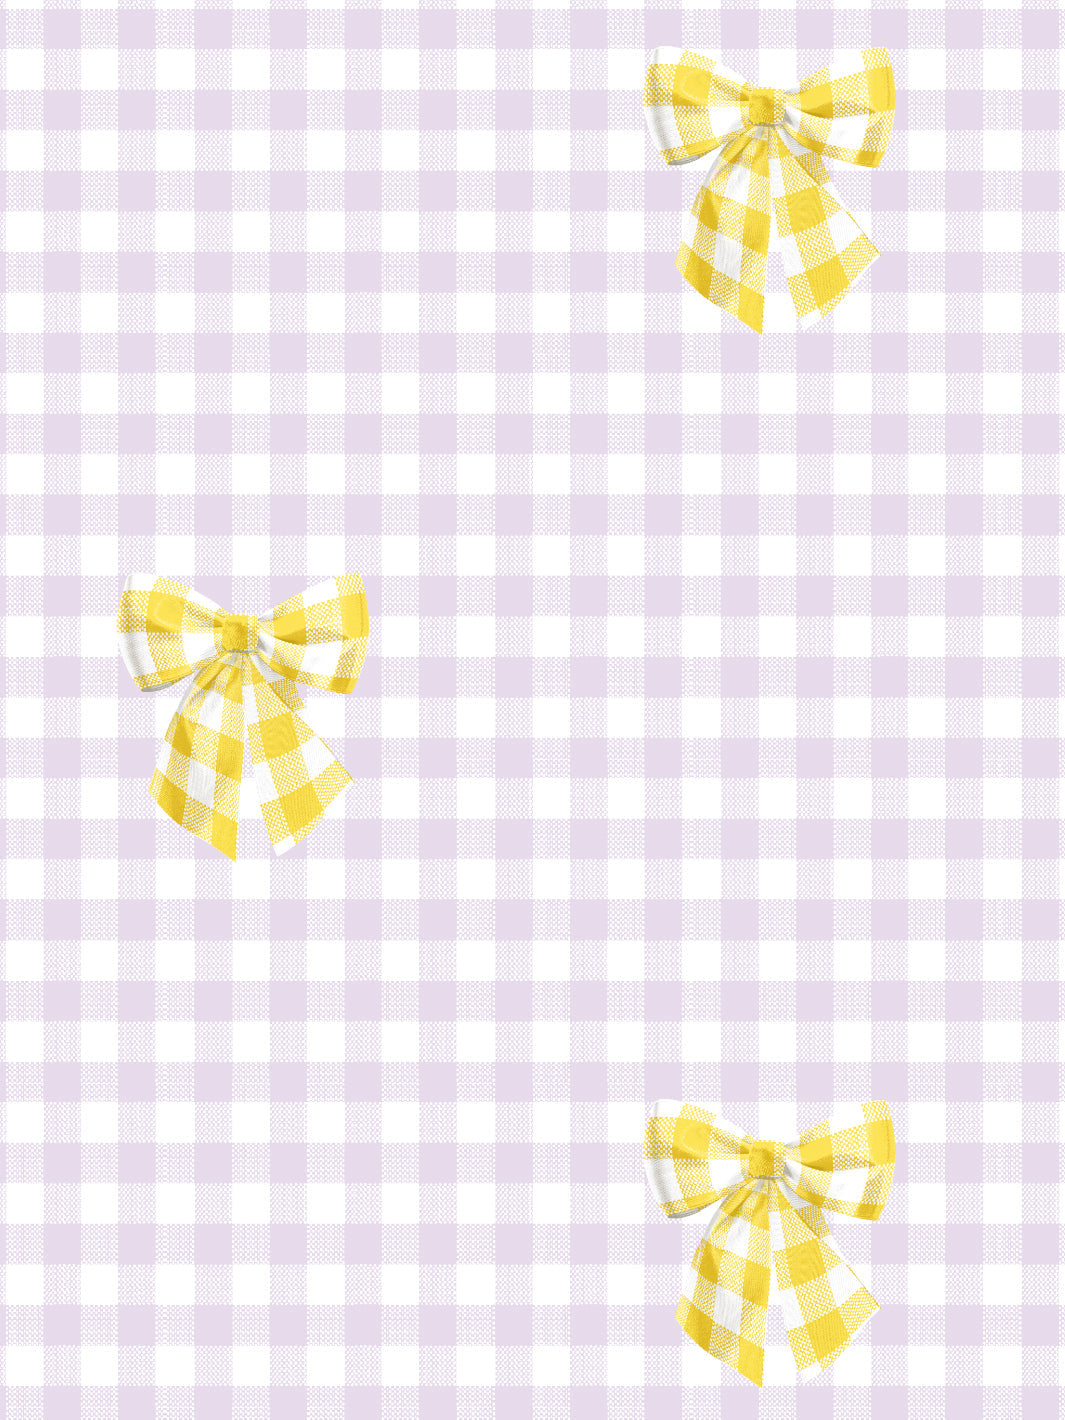 'Barbie™ Gingham Bow' Wallpaper by Barbie™ - Daffodil on Lilac